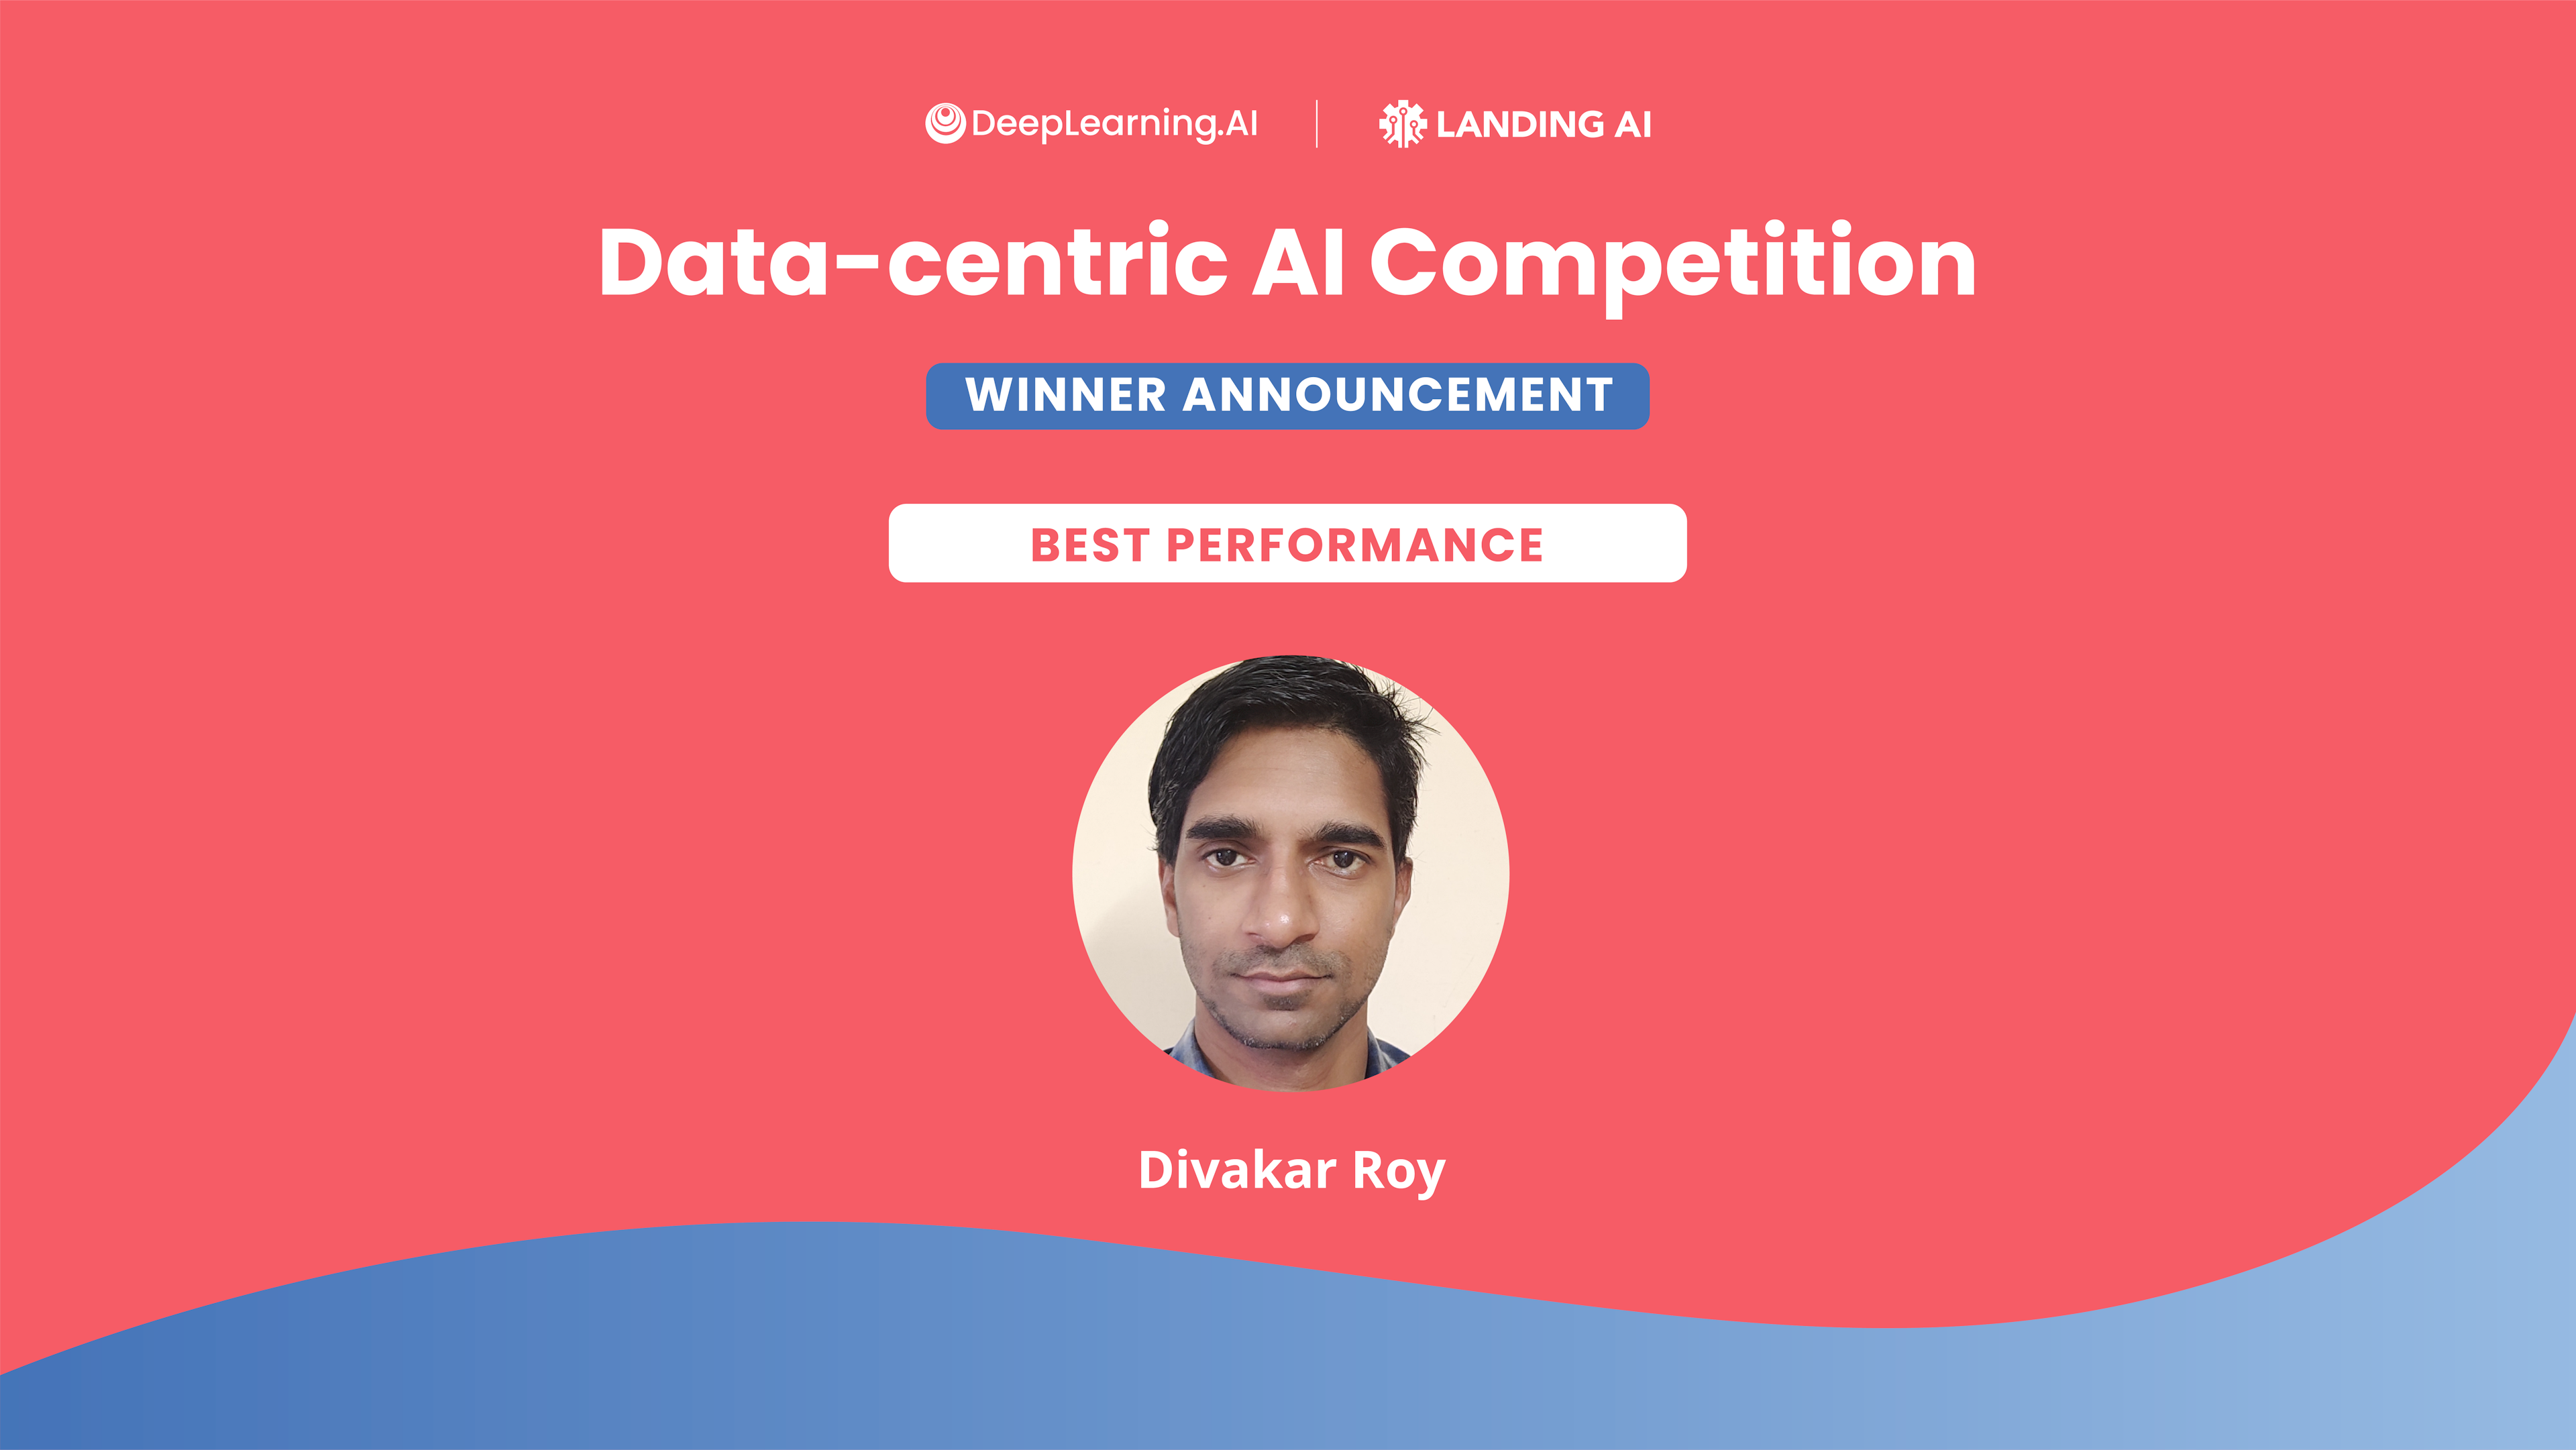 How I Won the First Data-centric AI Competition: Divakar Roy